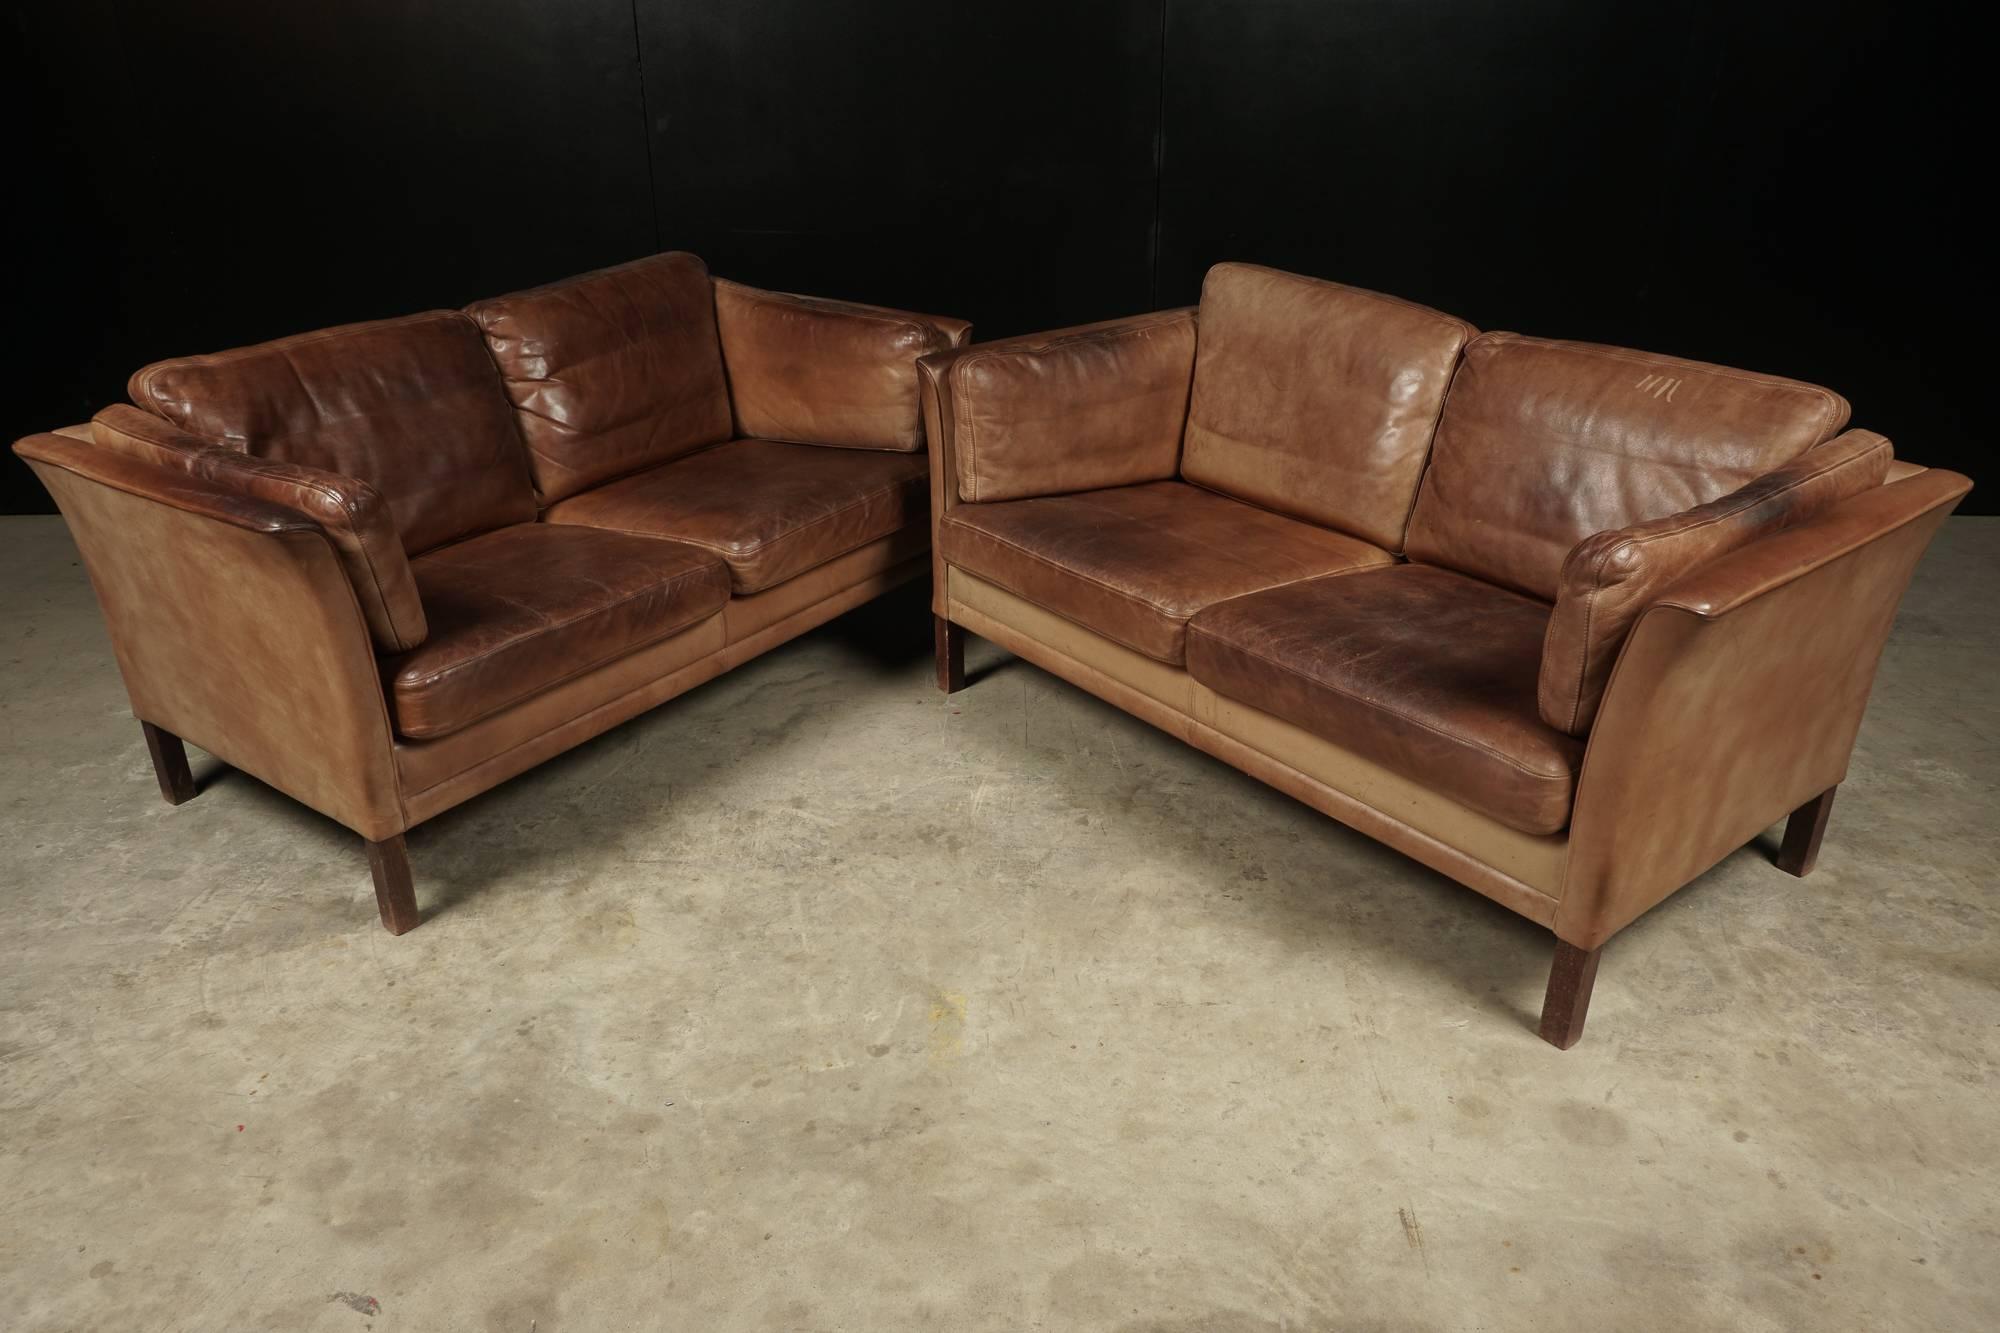 Mid-Century Modern Pair of Two-Seater Leather Sofas from Denmark, circa 1970